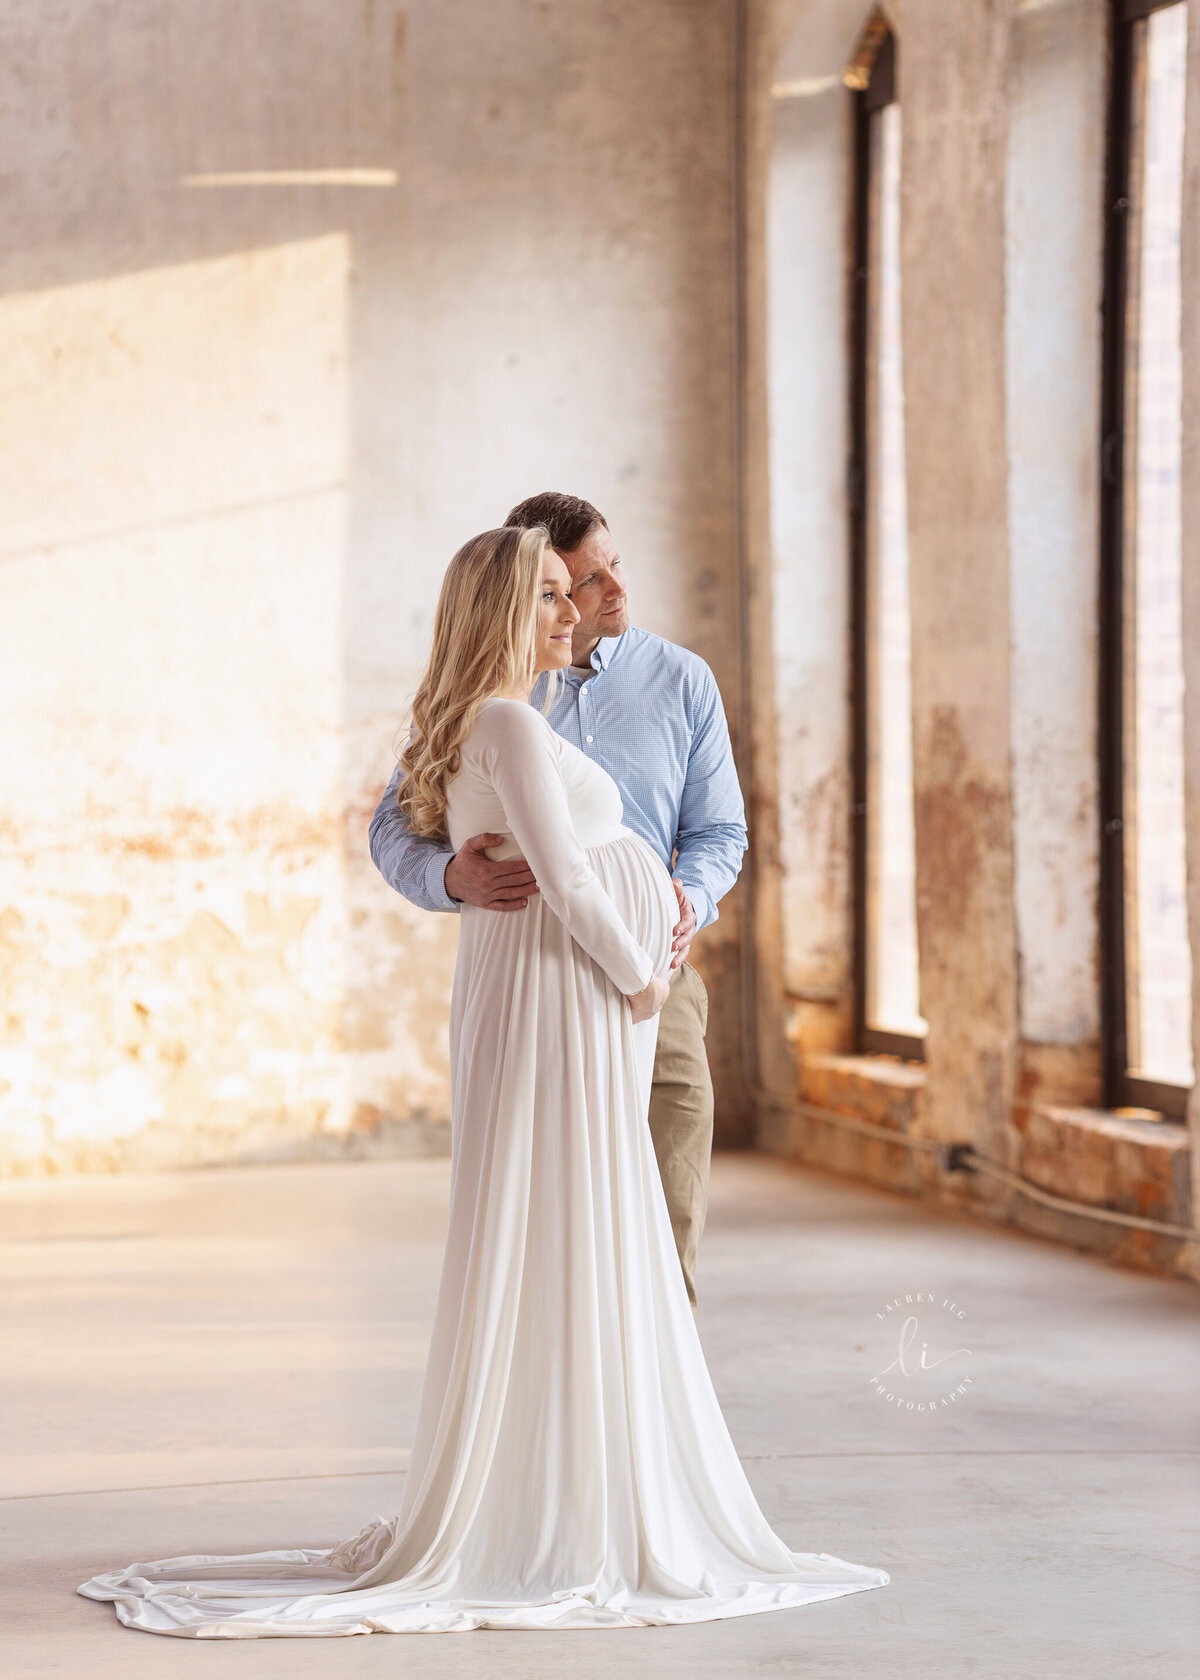 Maternity session at The Providence Cotton Mill in Maiden, NC